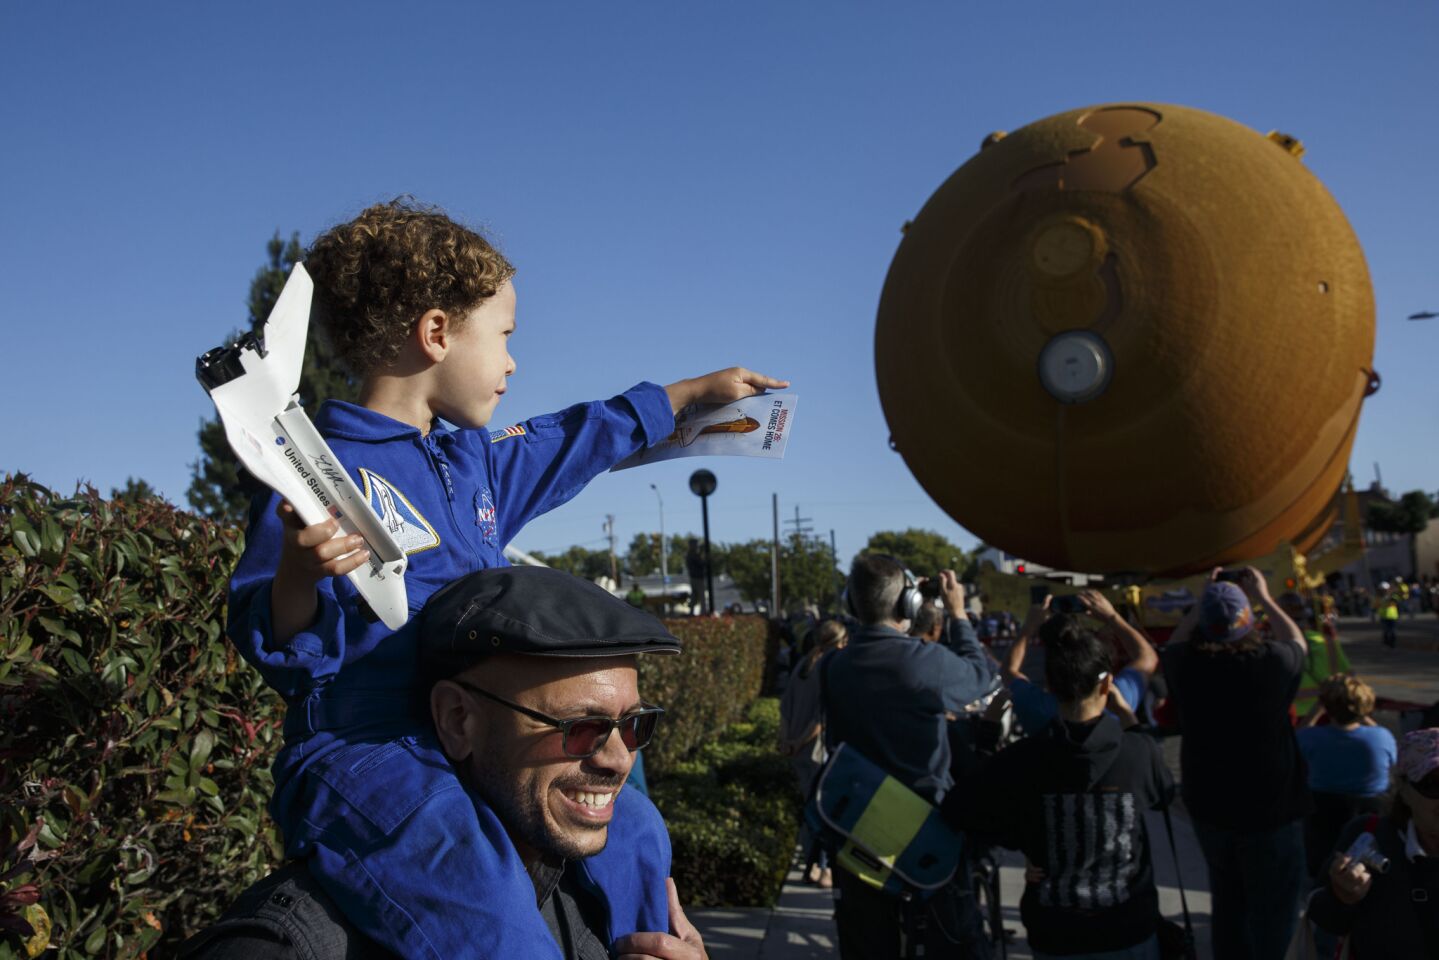 Darren Hackett carries son Sawyer, 4, dressed as an astronaut, as the ET-94 fuel tank makes its way to the California Science Center.